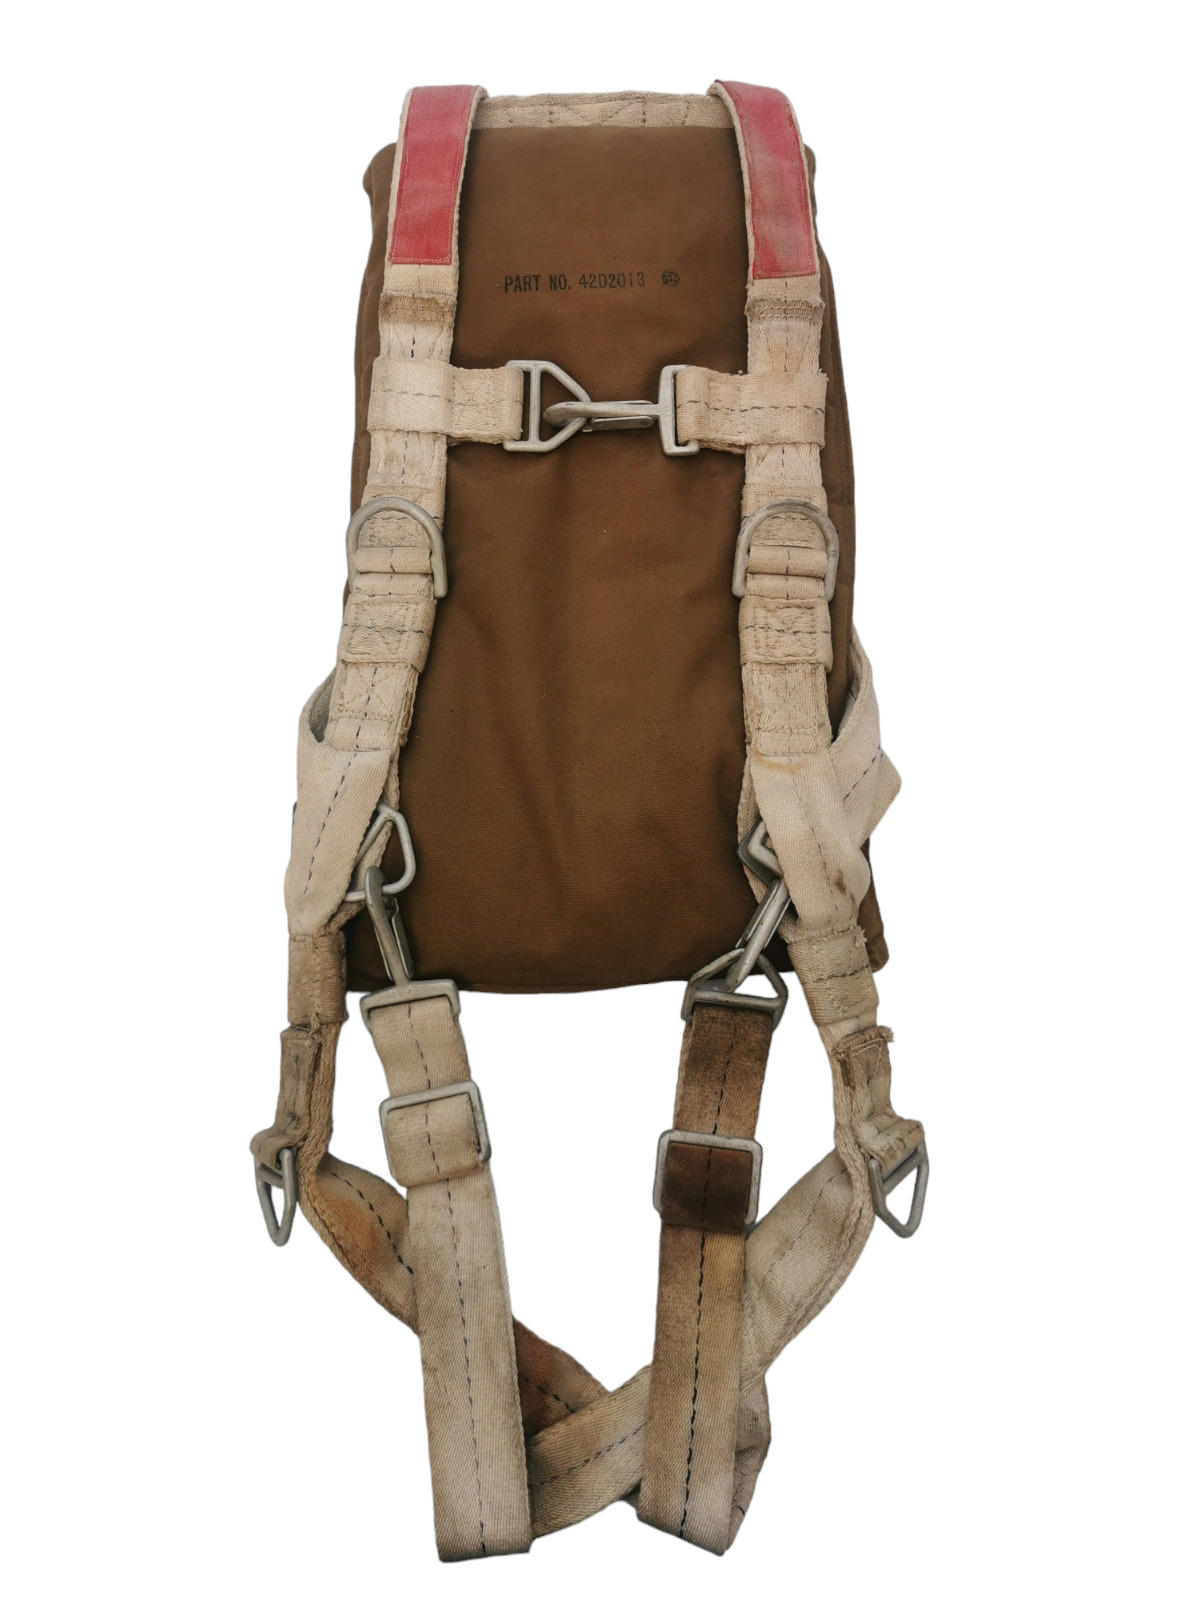 WW2 USAAF AN-6513-1A Chest Parachute Harness - Group 1 Red 